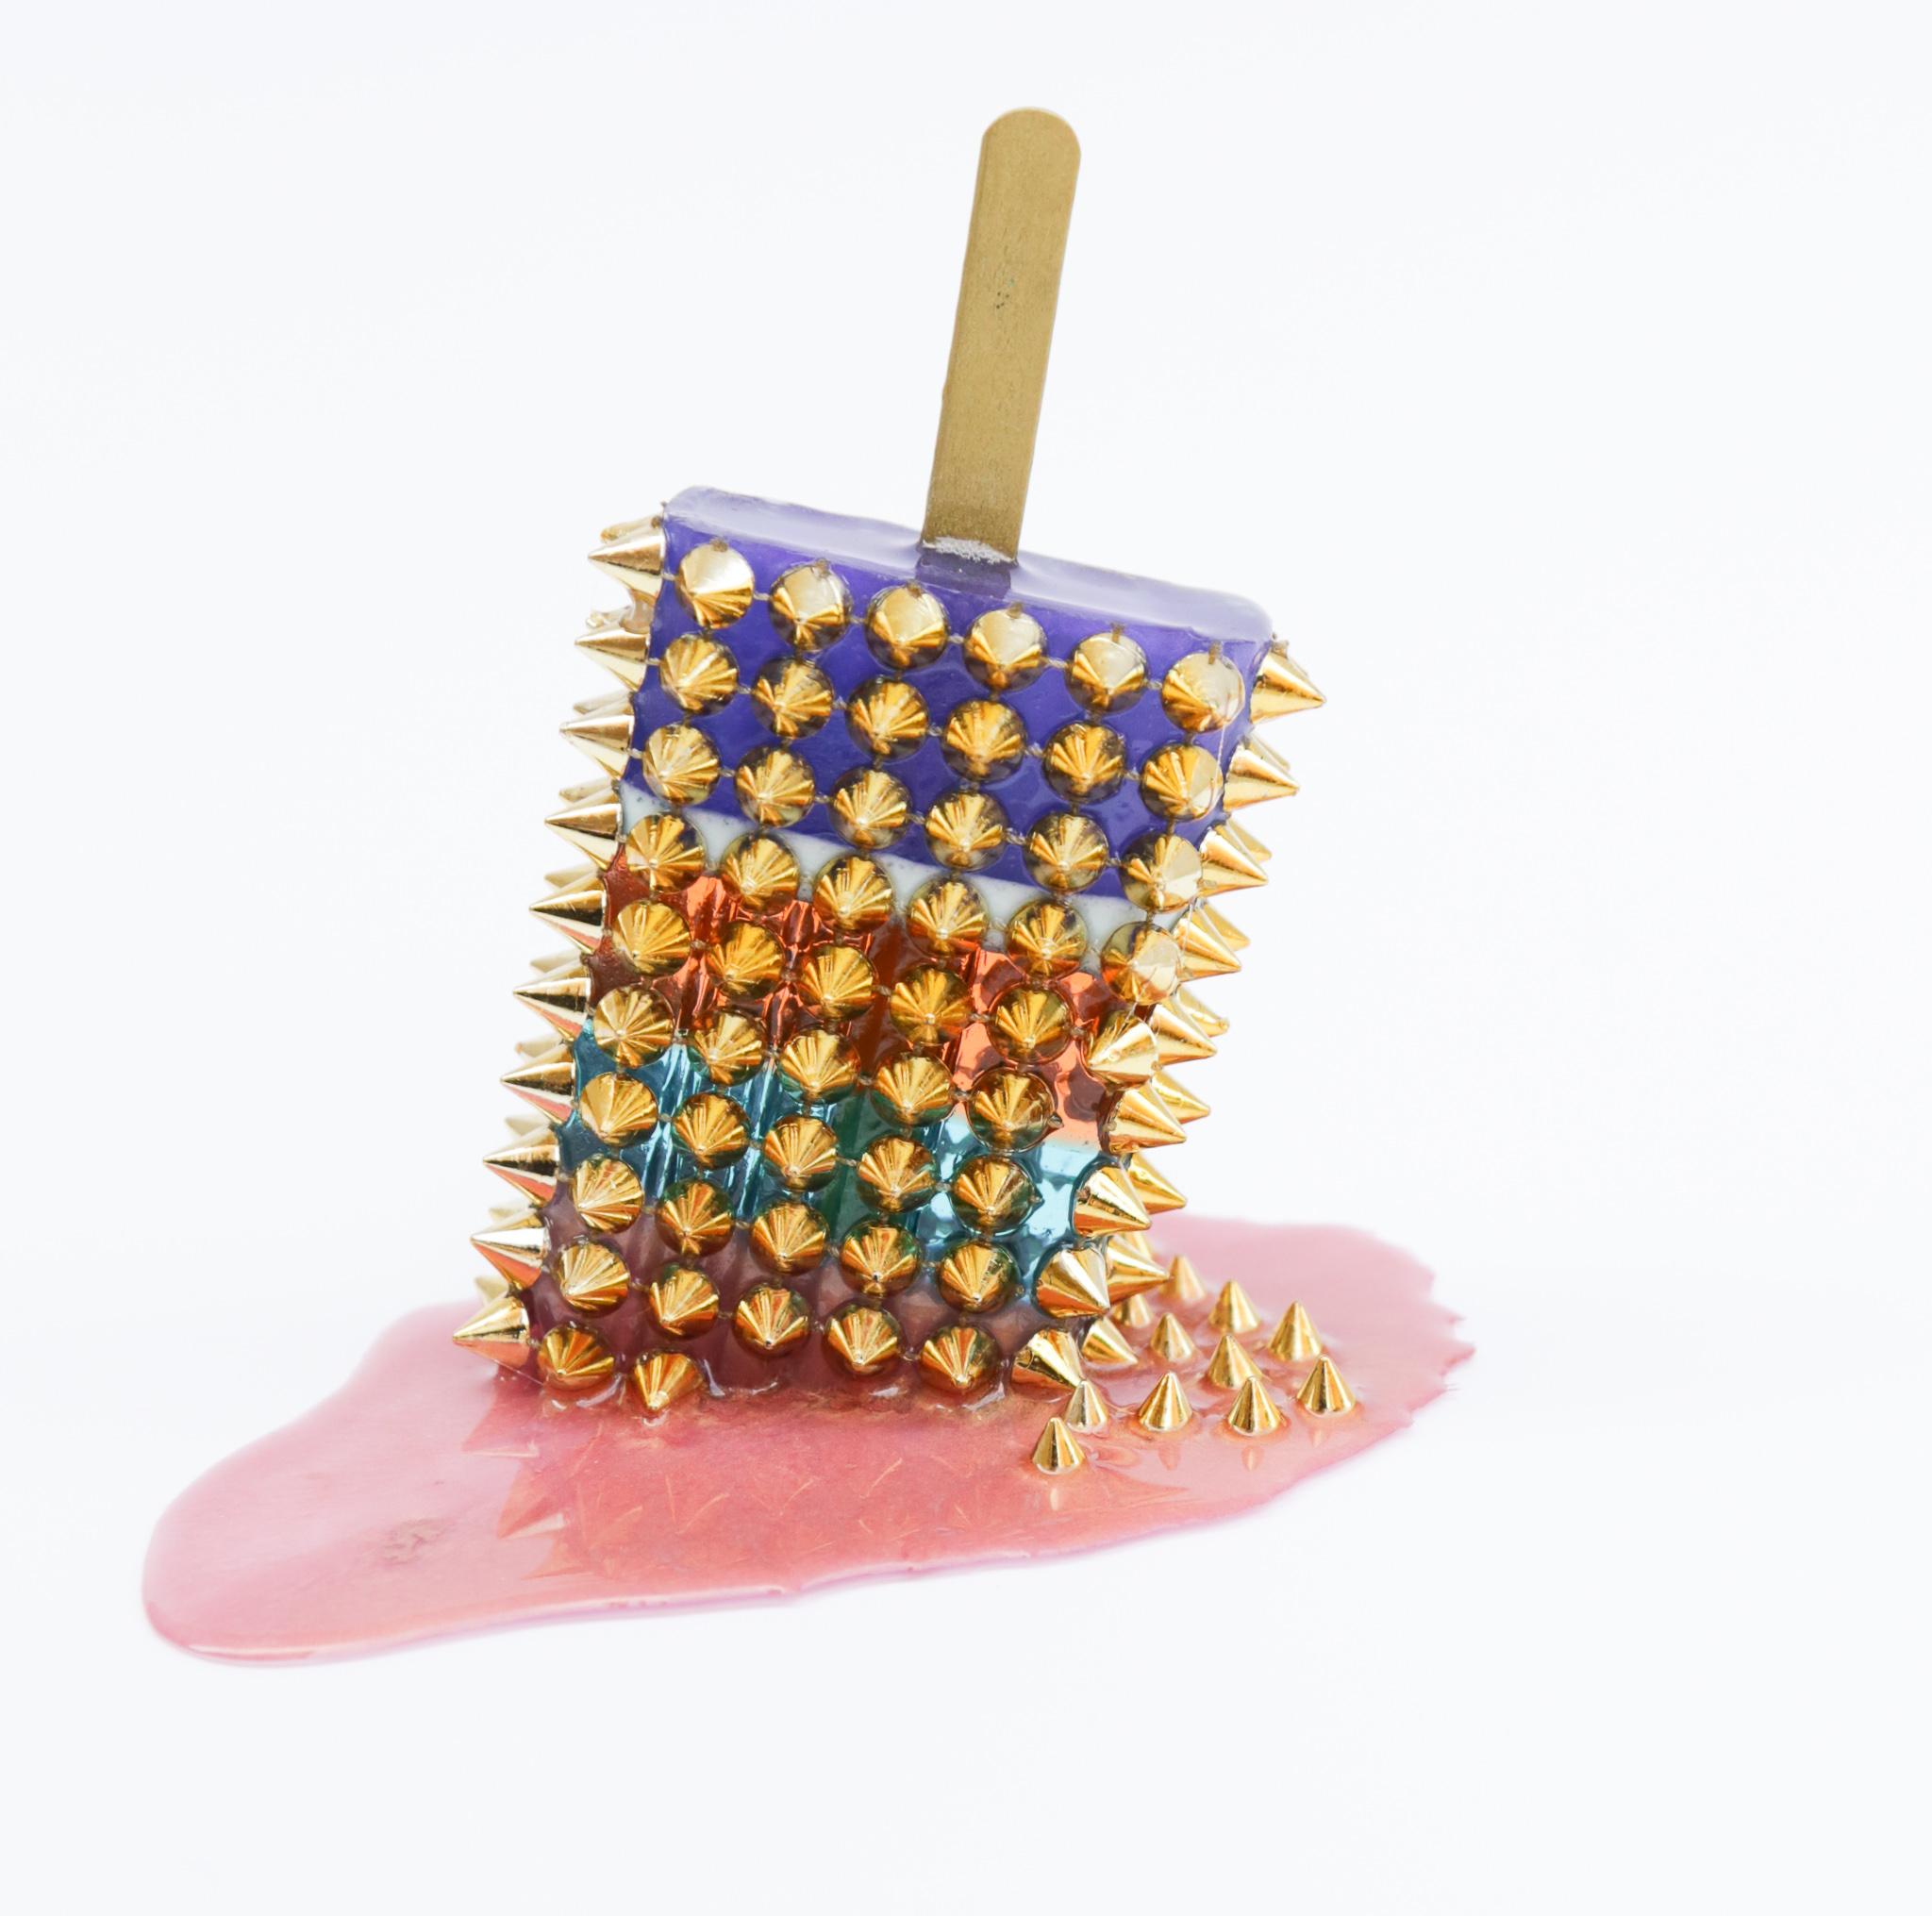 This is a brand new, original resin sculpture by Betsy Enzensberger. It was made with resin, glitter, ink and golden resin spikes.  This is a life-size sculpture, weighing just a couple of ounces. It's the perfect POP to any home.

Betsy